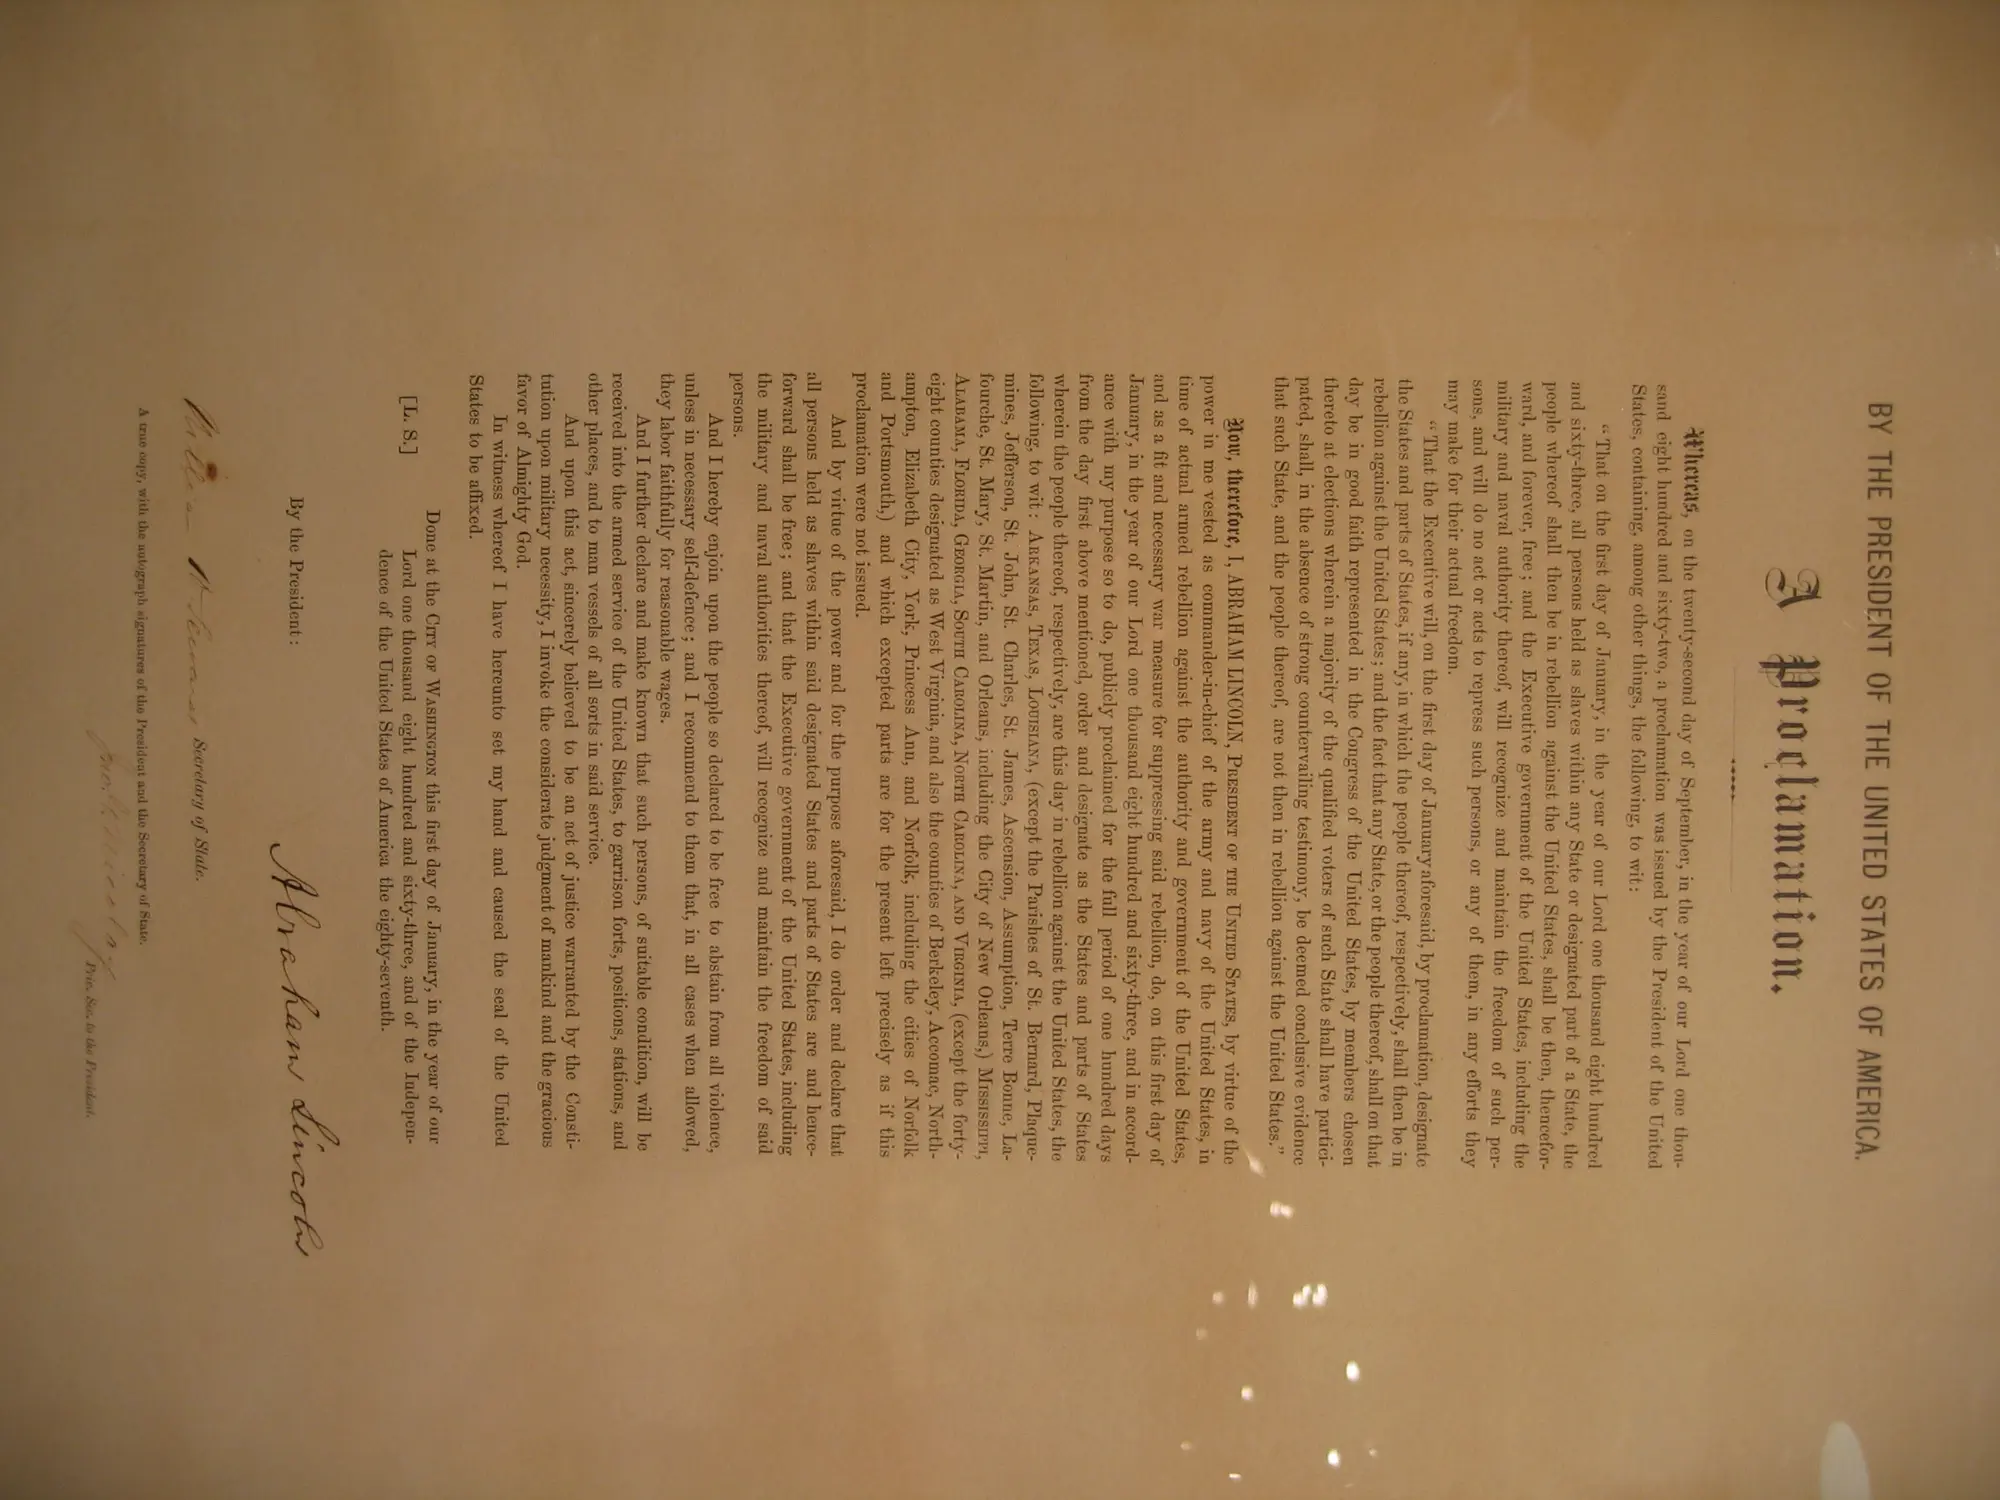 Robert F. Kennedy's copy of the Emancipation Proclamation (thehistoryblog)